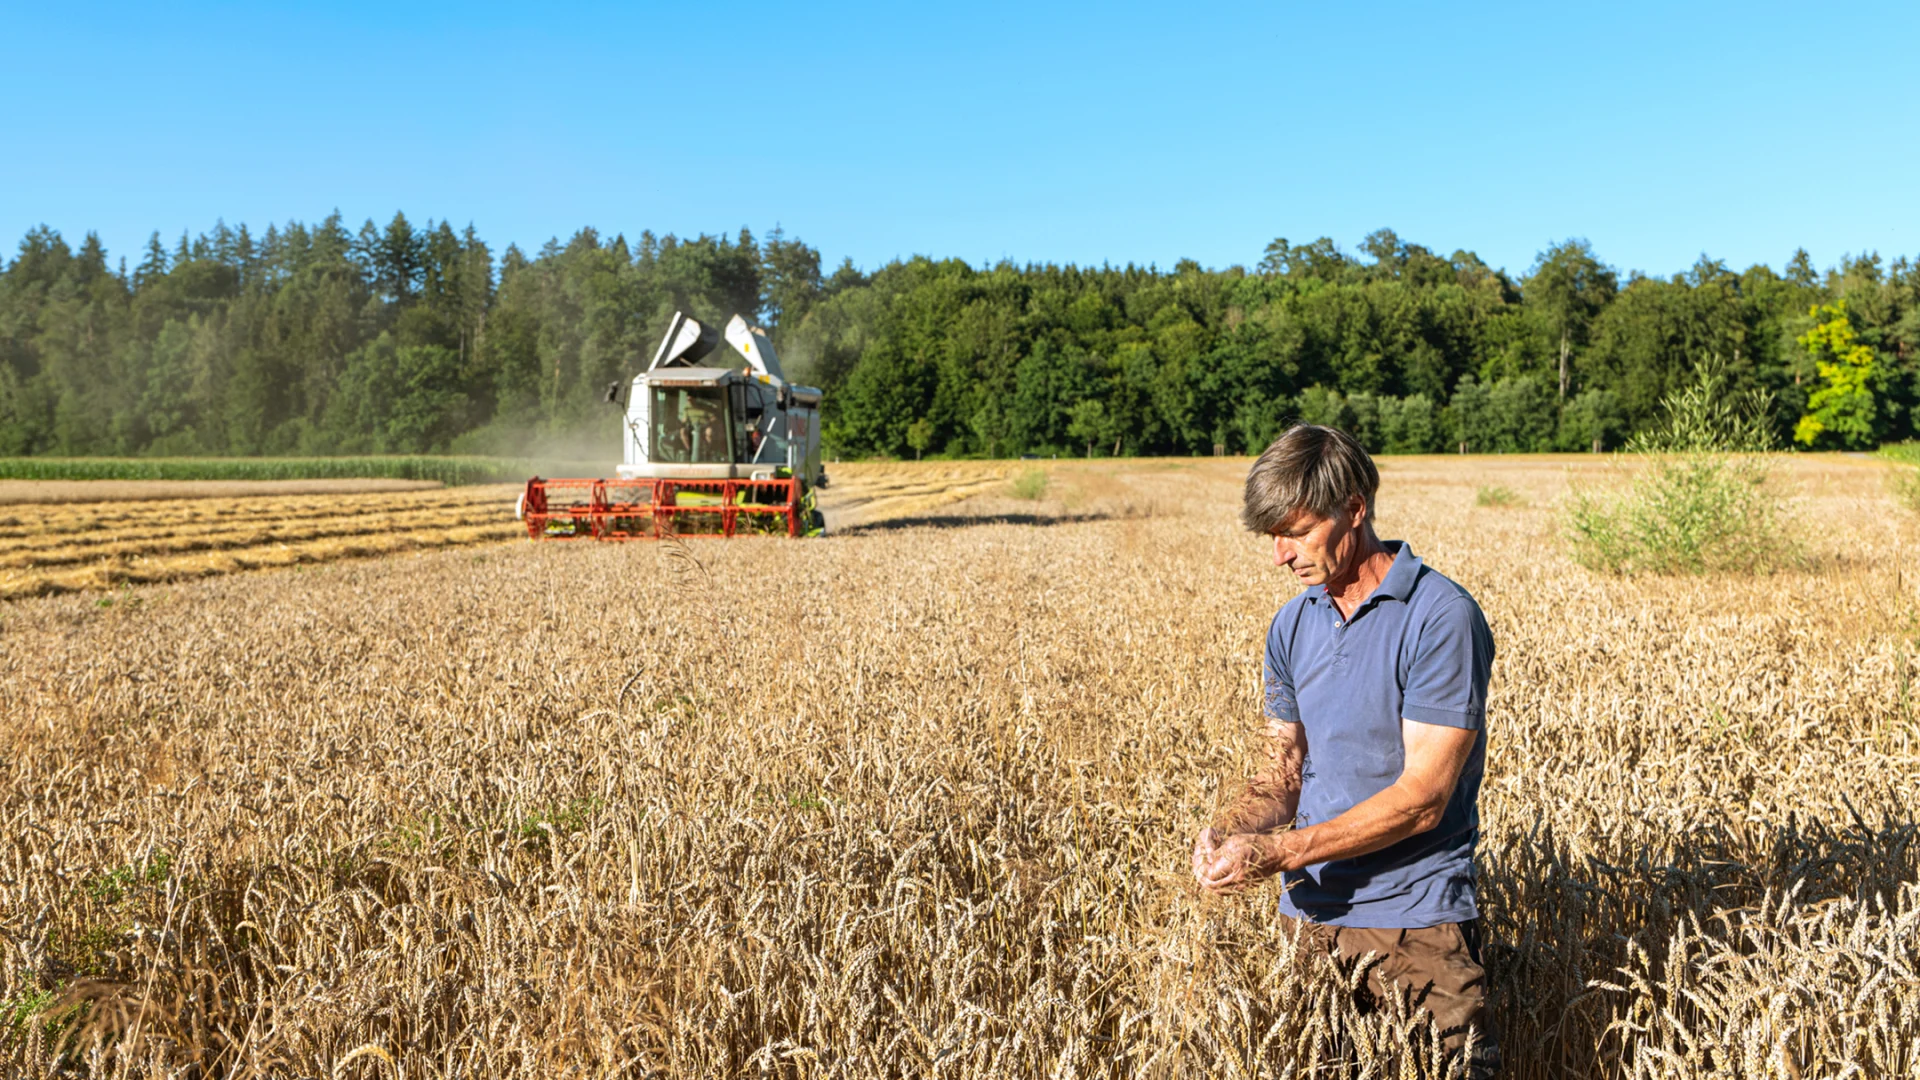 Jürg Kägi standing in a wheat field, with an agricultural machine in the background